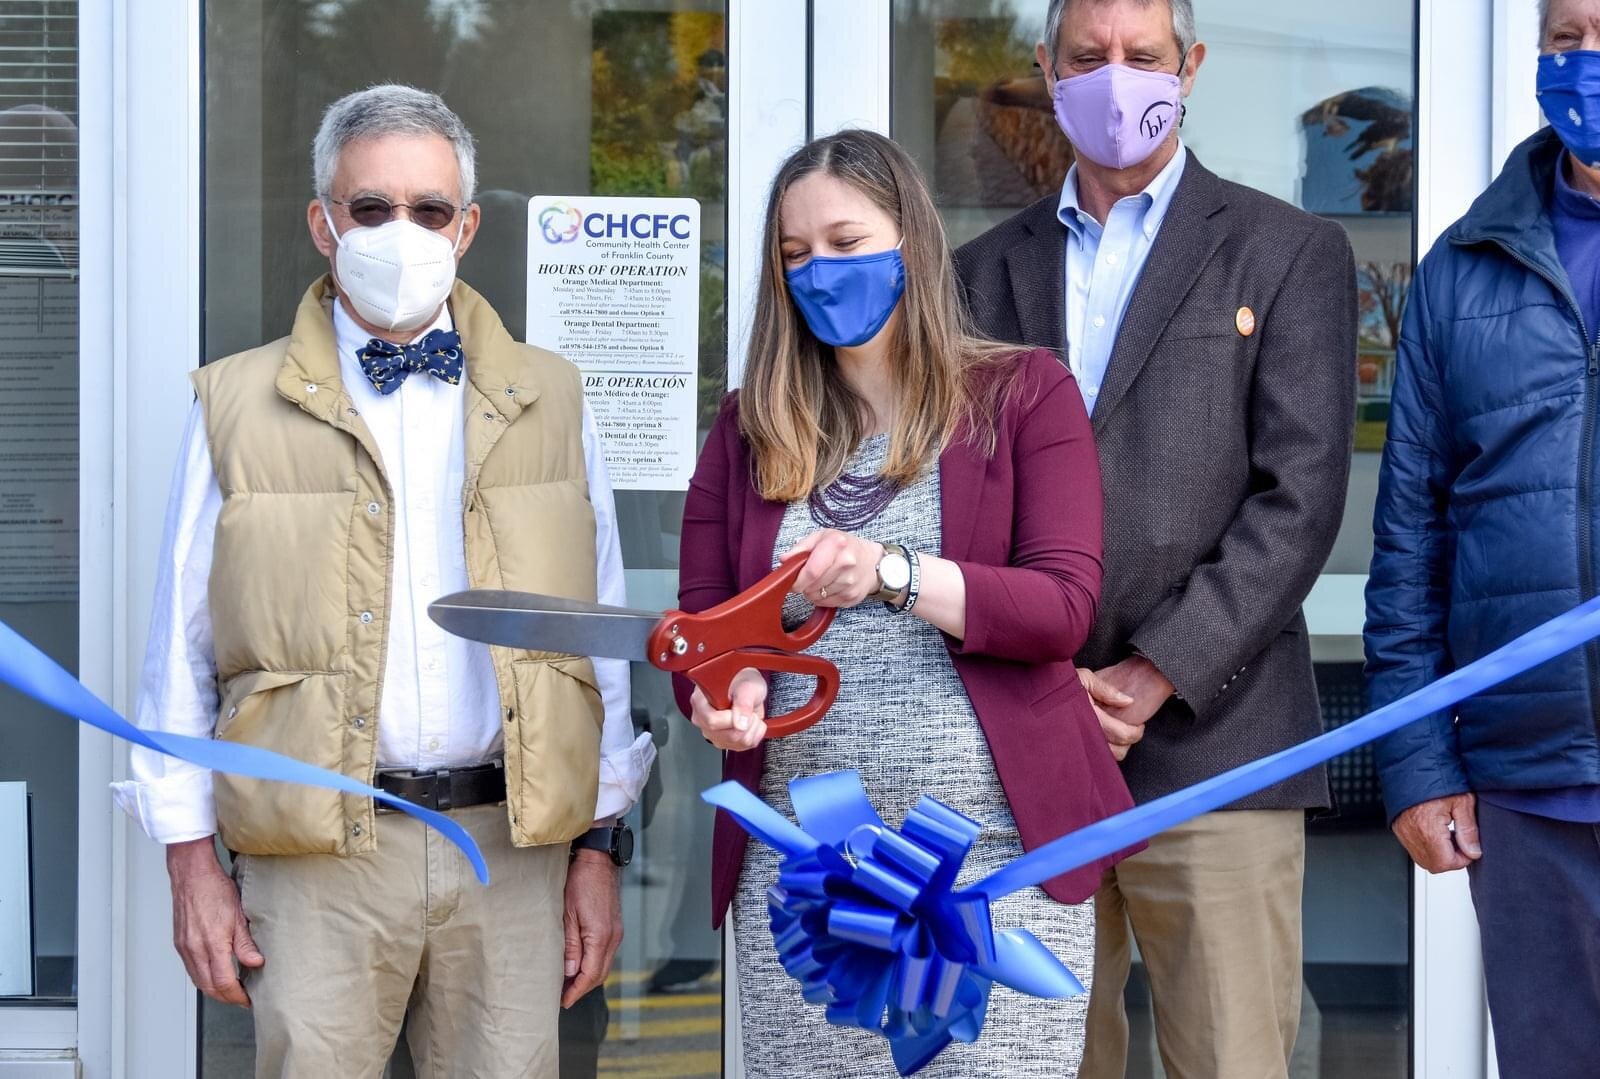 CEO Allison van der Velden cuts the ribbon, grand opening April 28th 2021 (photo credit to Mitchell Grosky)